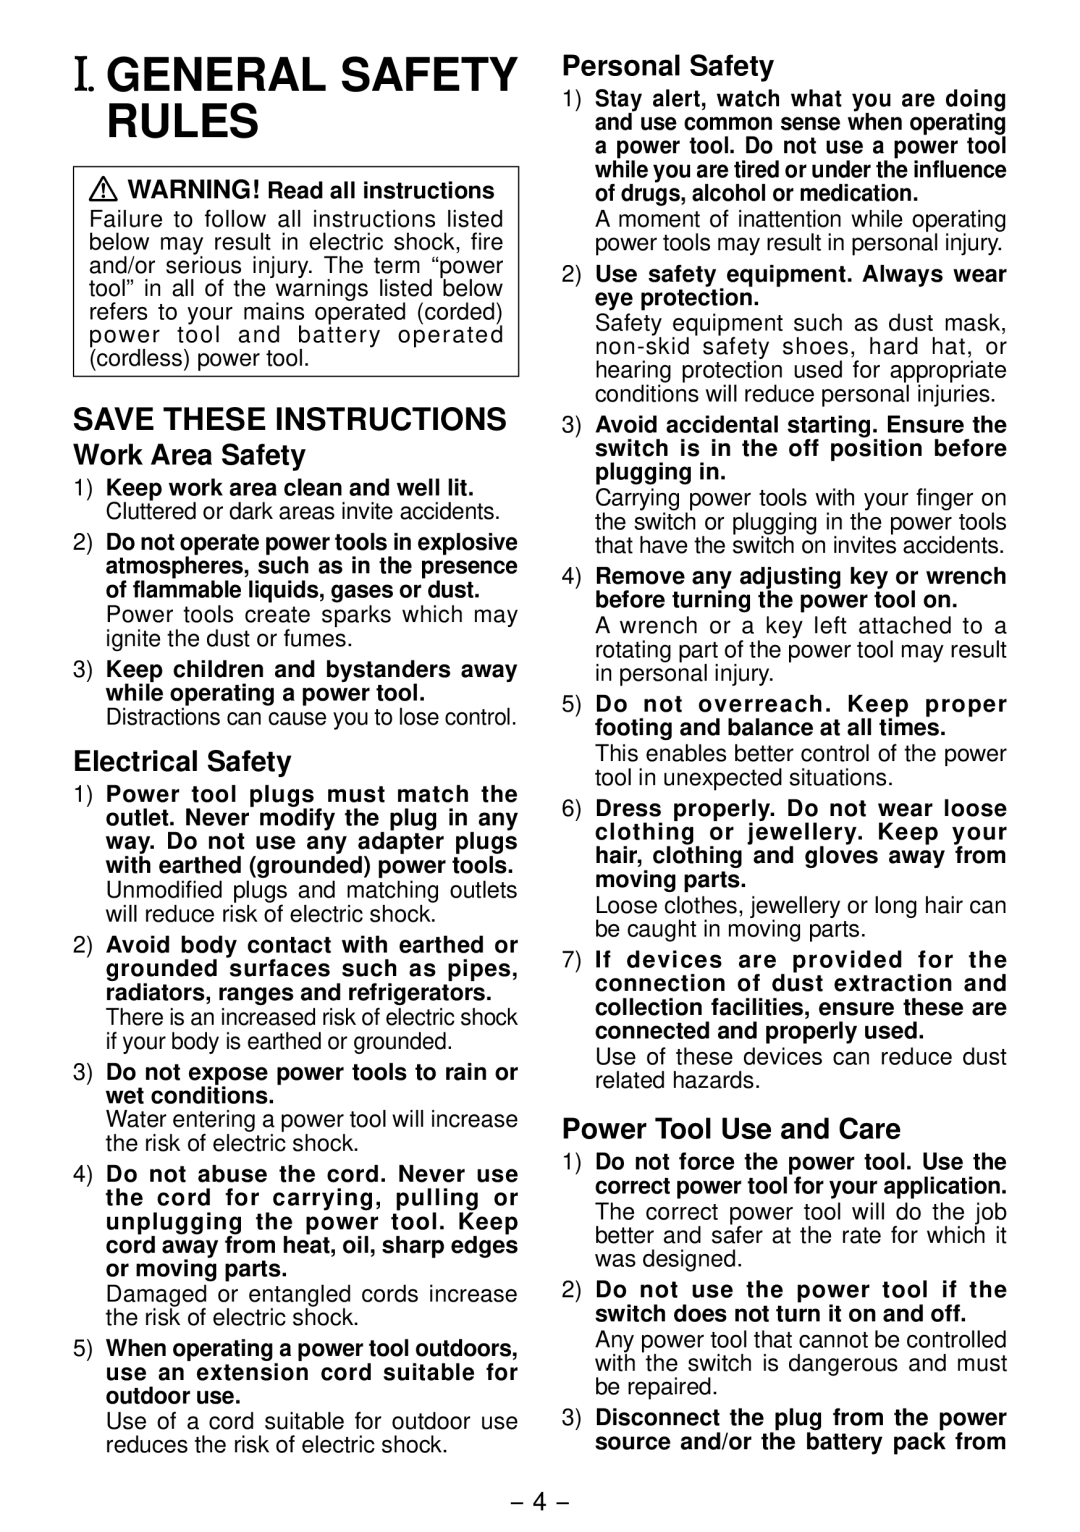 Panasonic EYFLA2Q I. General Safety Rules, Save These Instructions, Work Area Safety, Electrical Safety, Personal Safety 